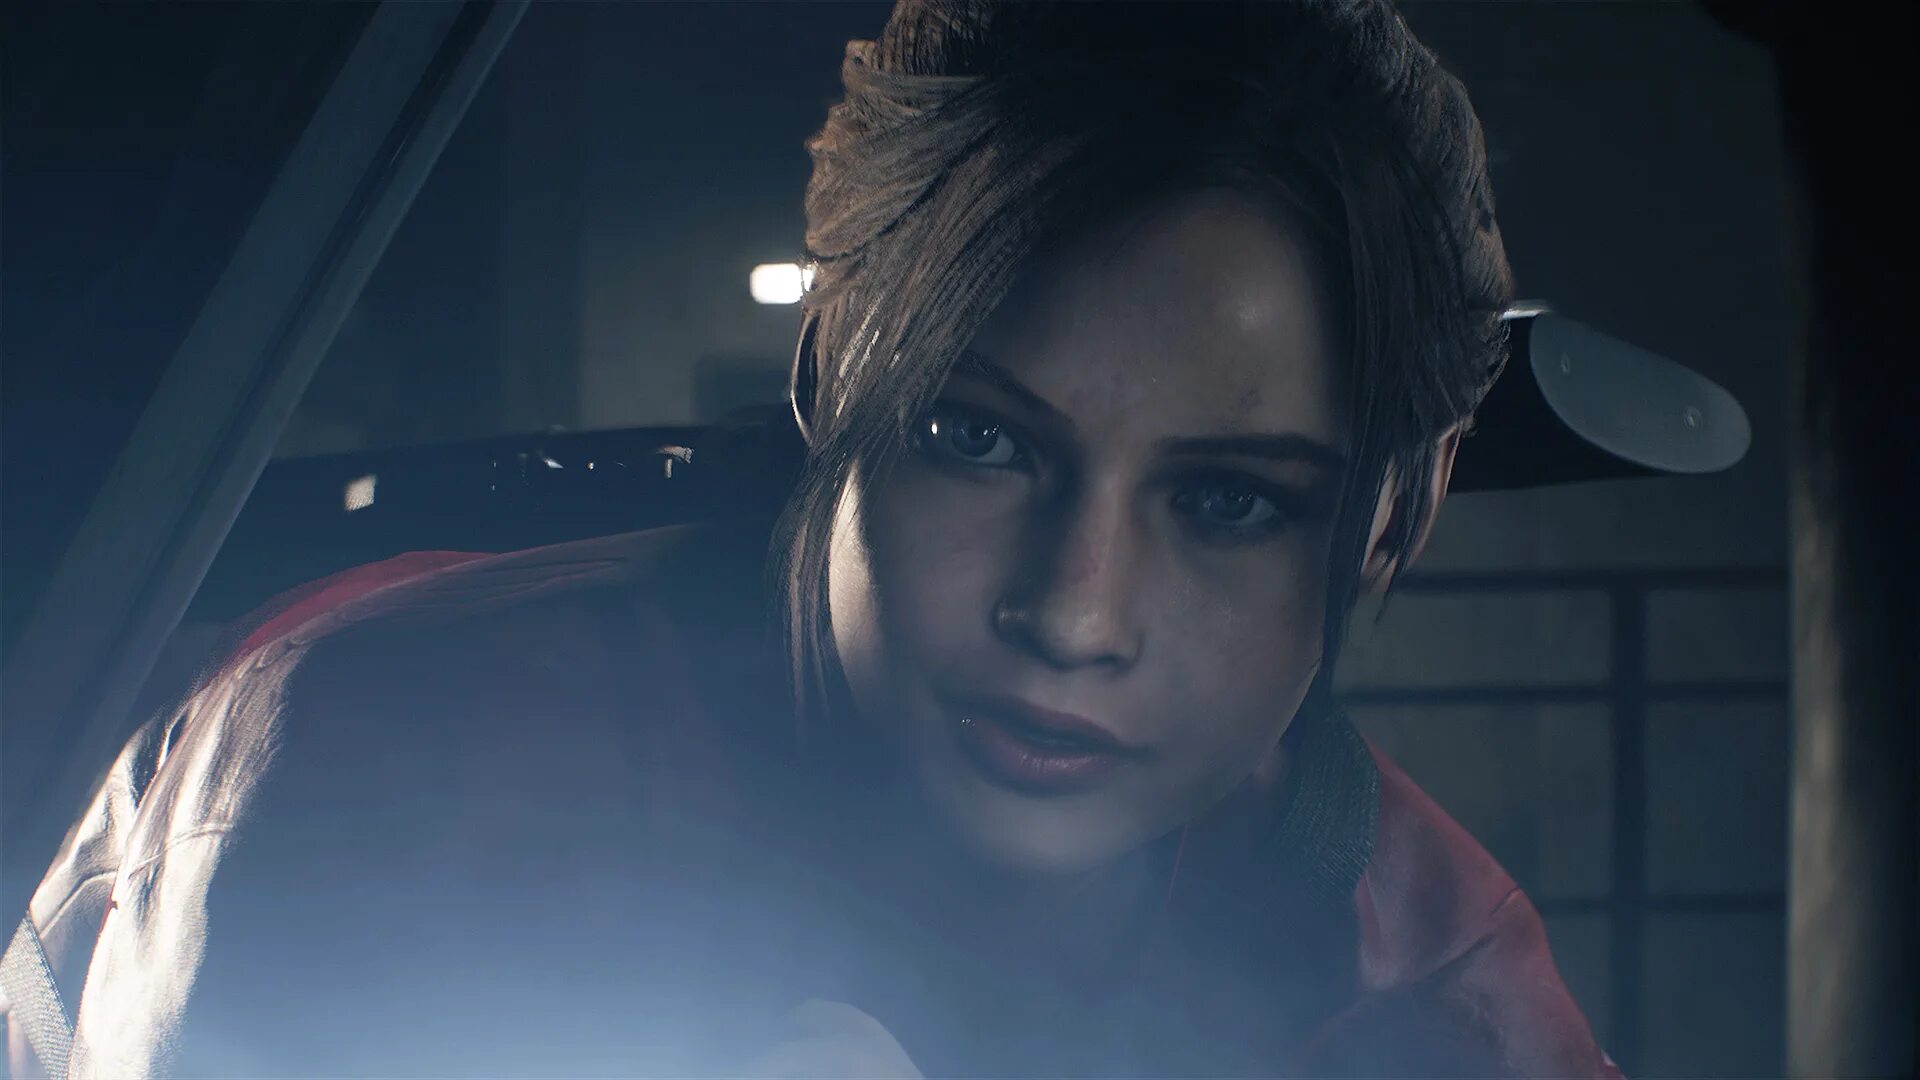 Claire Redfield Resident Evil 2 Remake. Клэр Редфилд Resident Evil 2 Remake. Клэр Редфилд обитель зла 3. Клэр Редфилд 2019. Resident evil 2 единорог